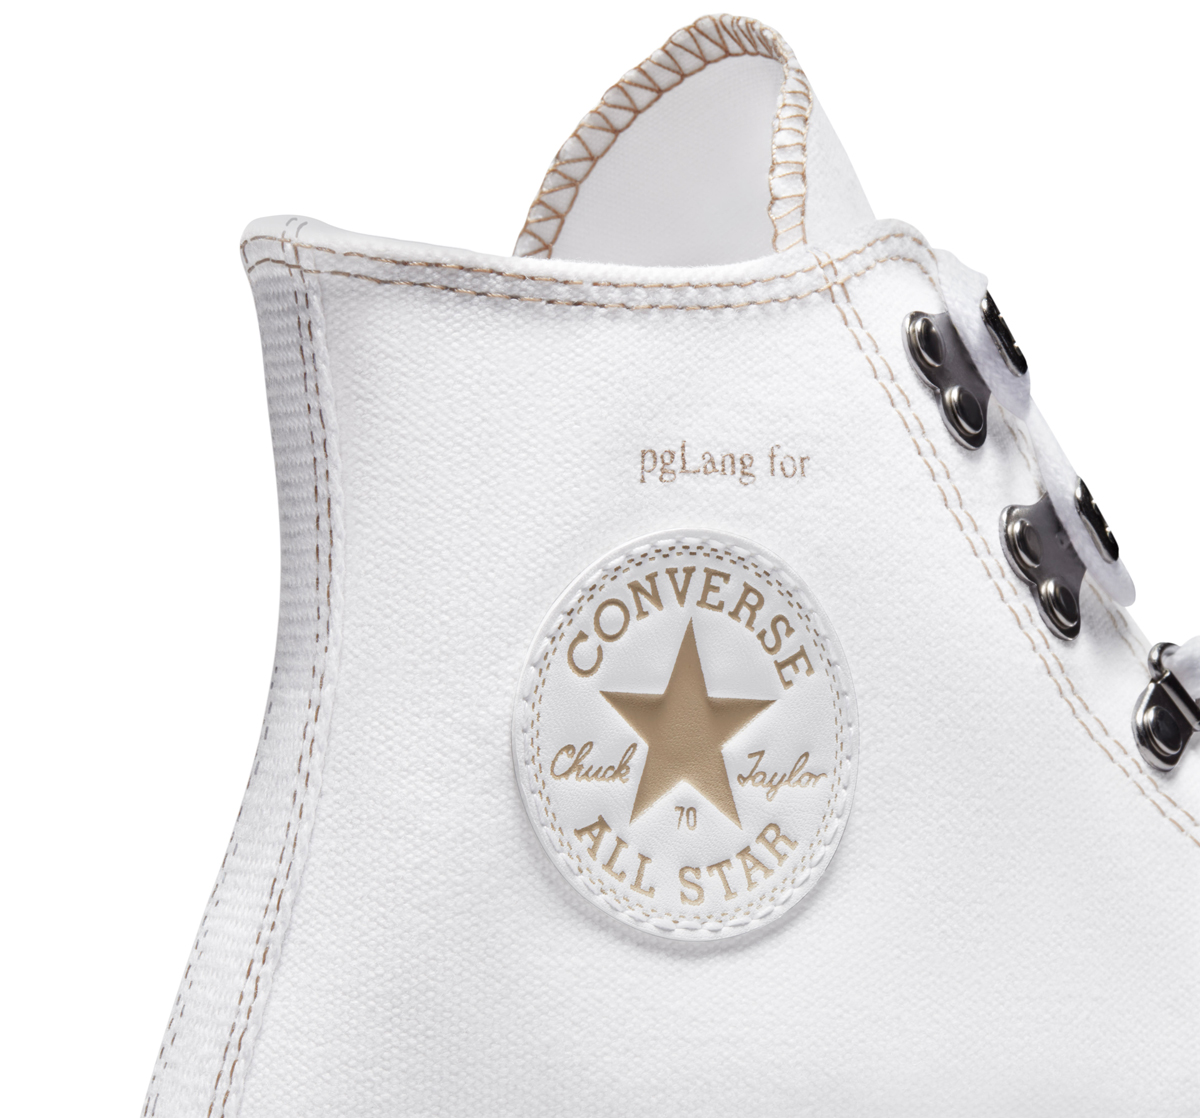 pglang-converse-collab-release-date-price-16